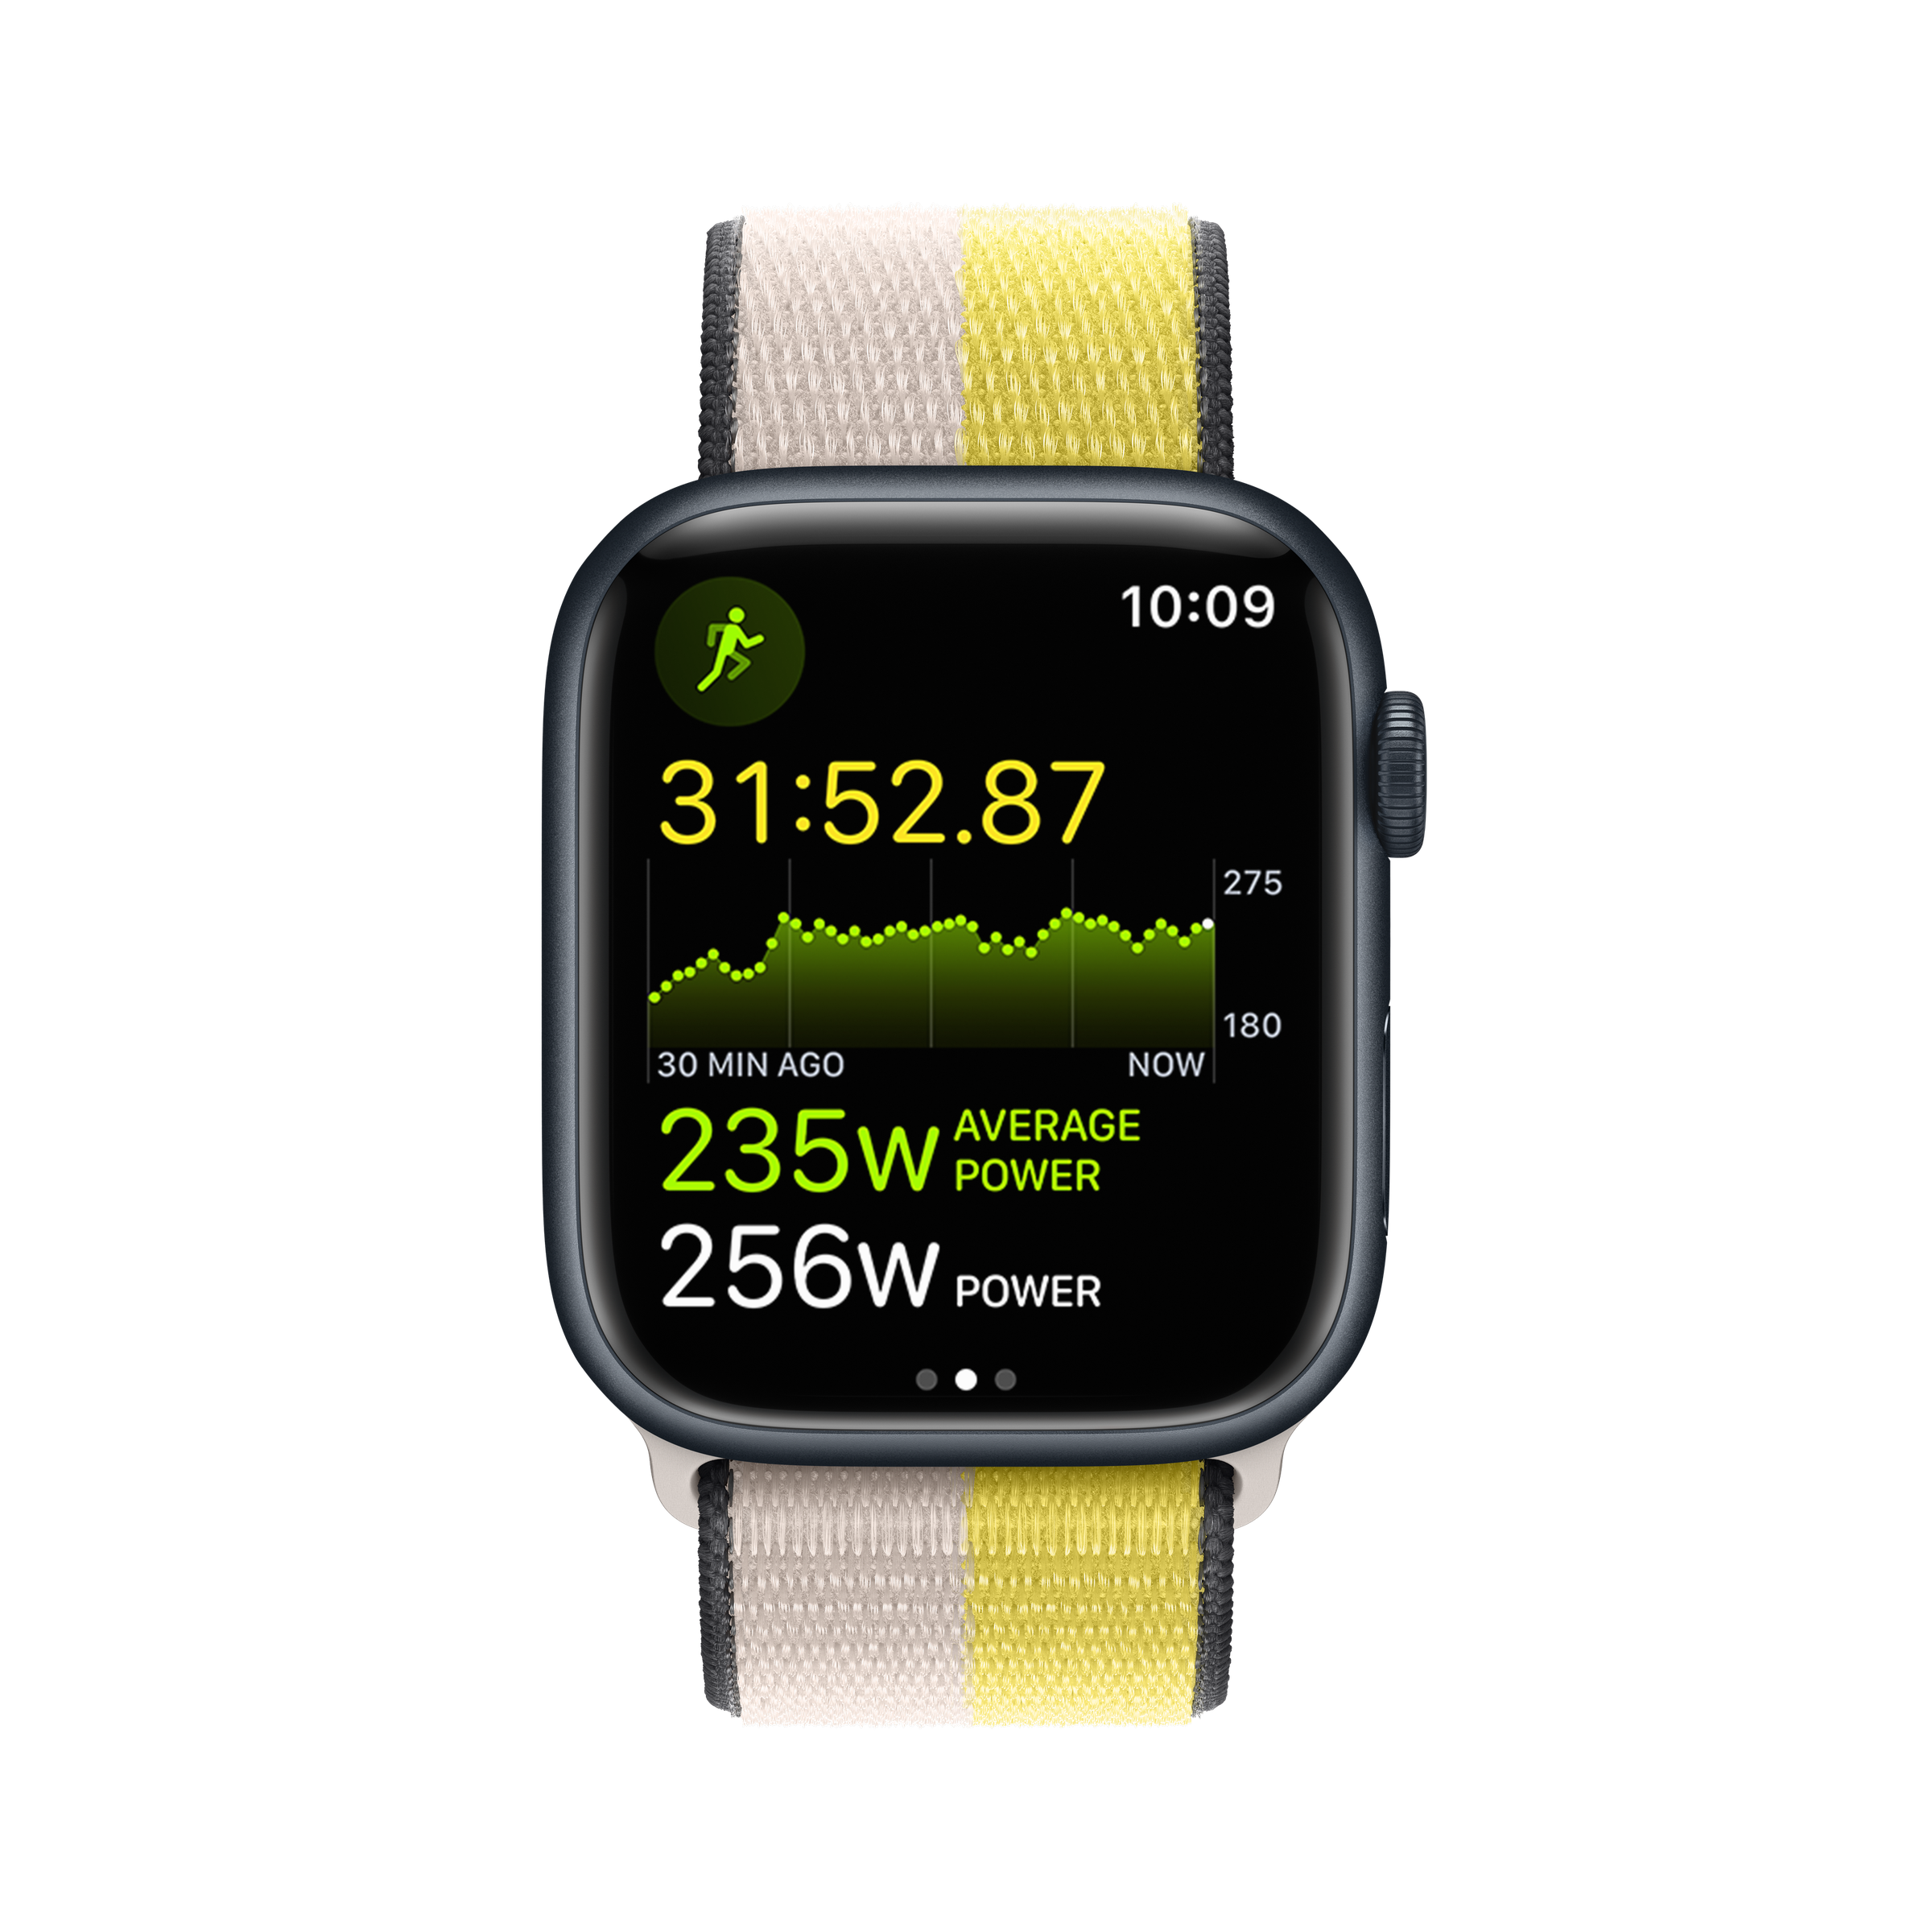 Power is a new running metric coming in watchOS 9.